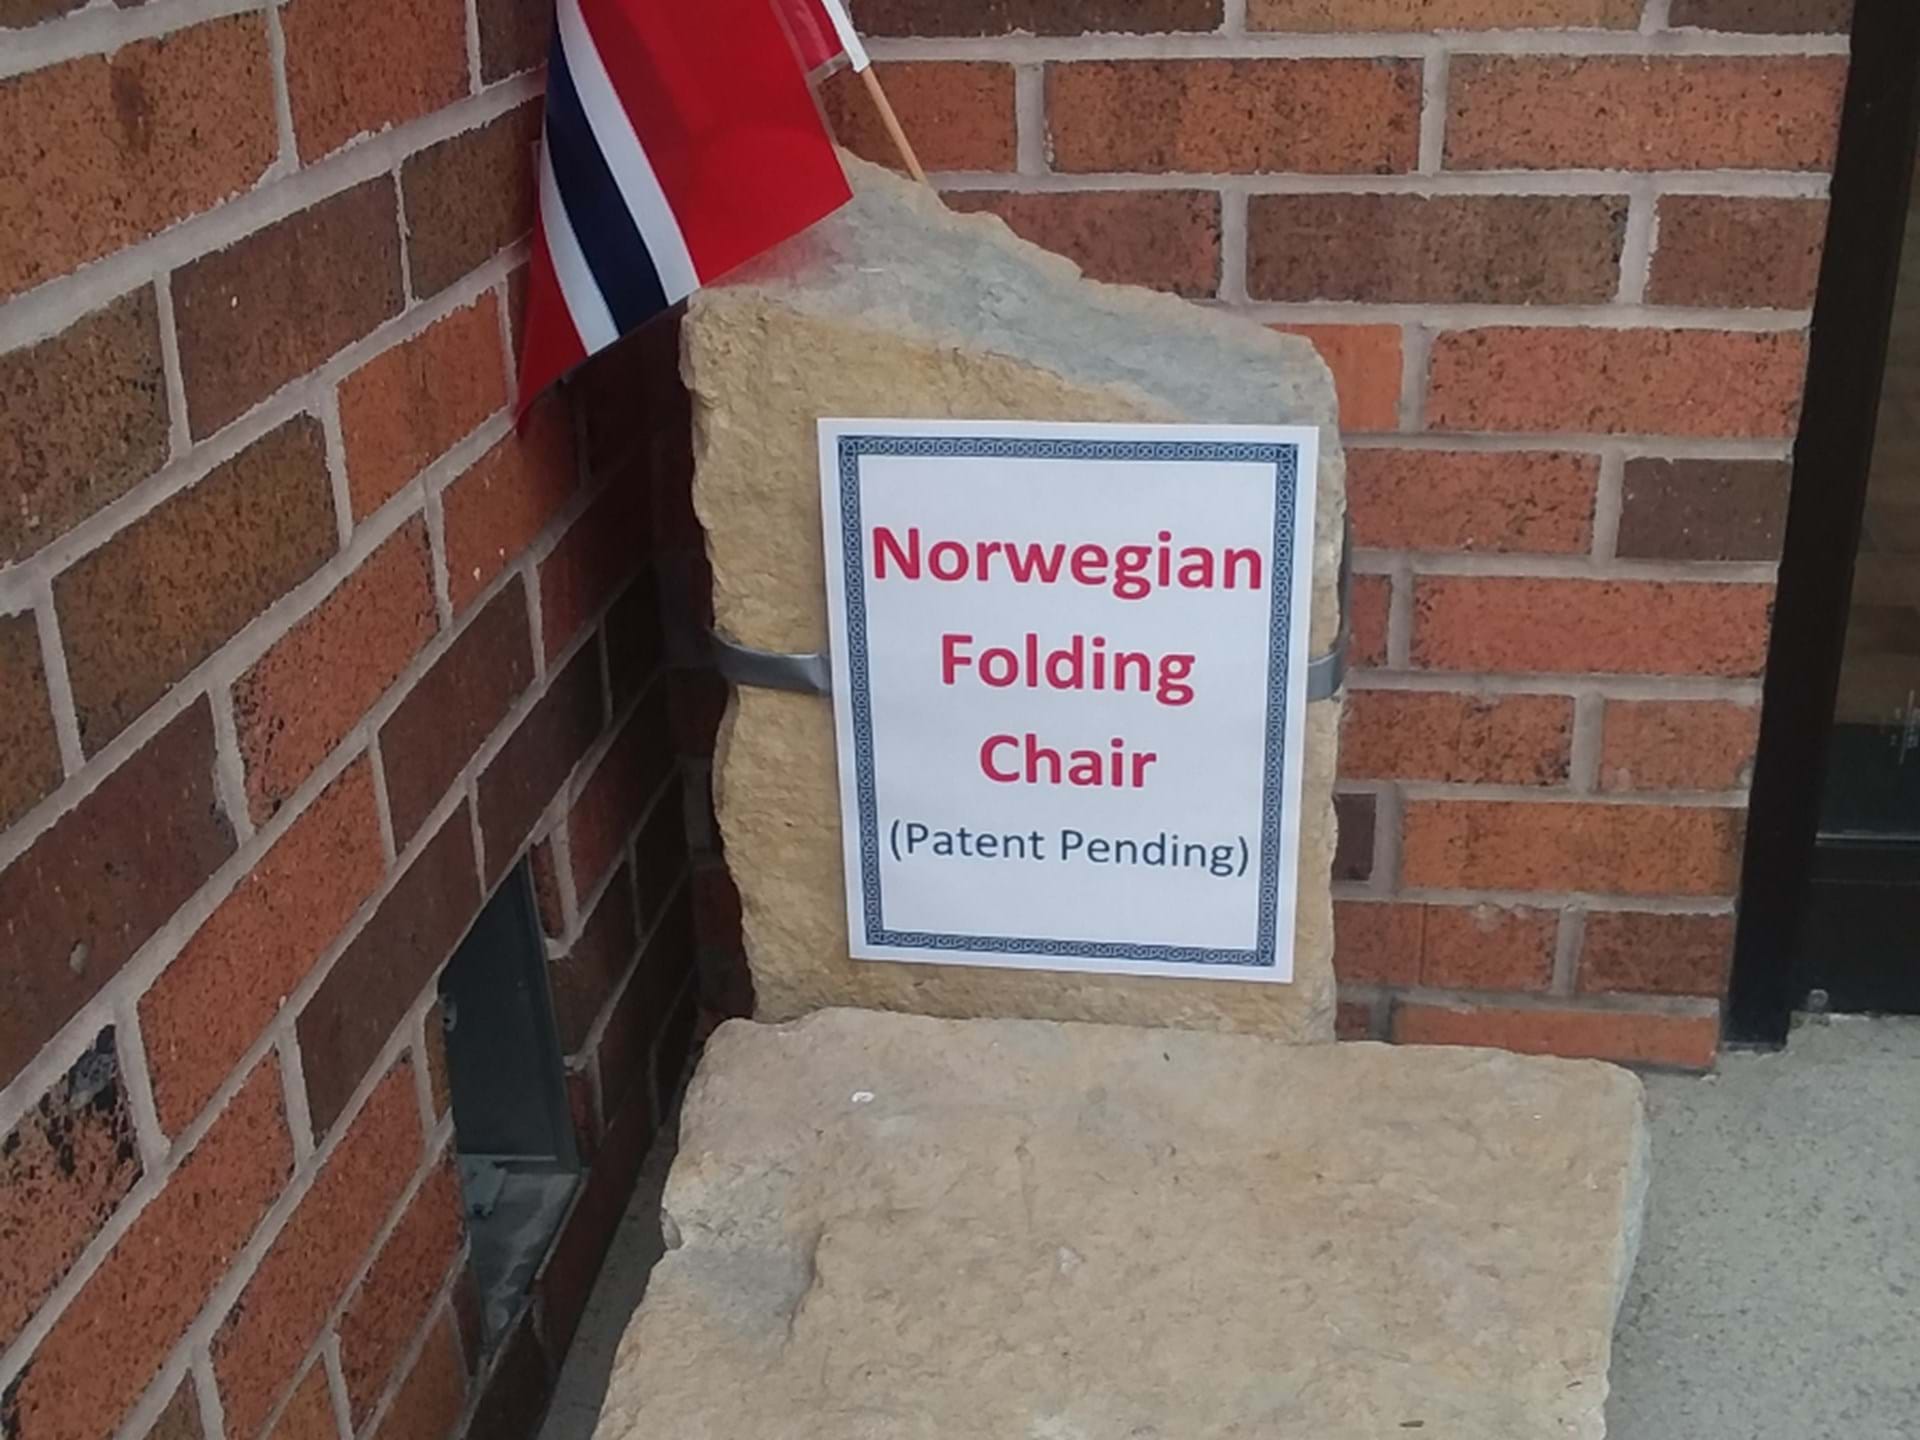 Our Norwegian Folding Chair